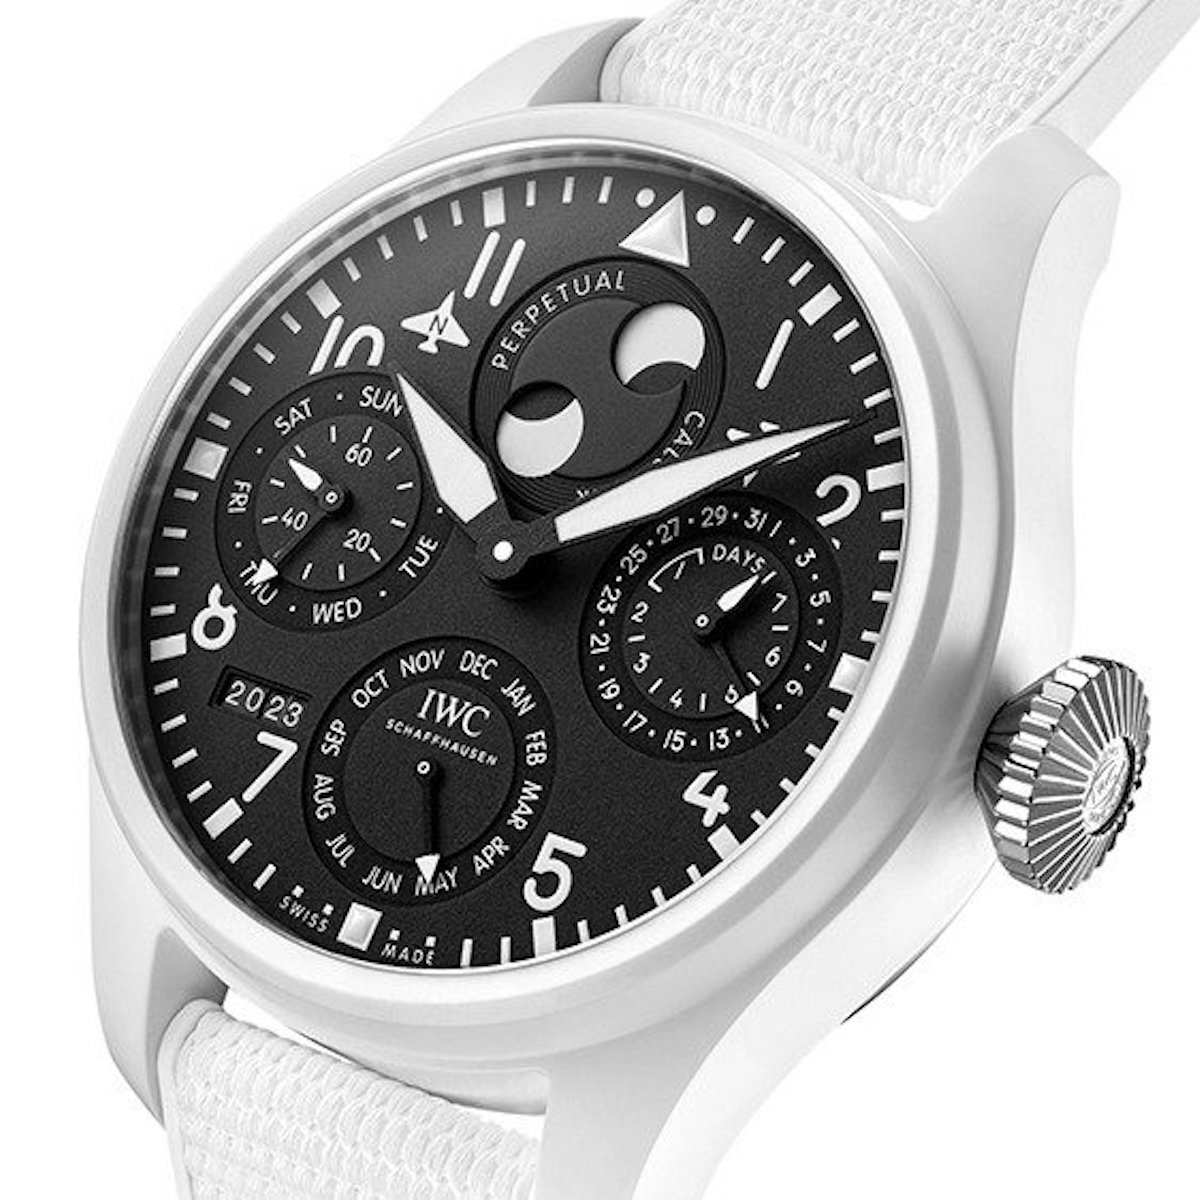 IWC Officially Unveiled the New White Pilot’s Watch Lewis Hamilton Wore ...